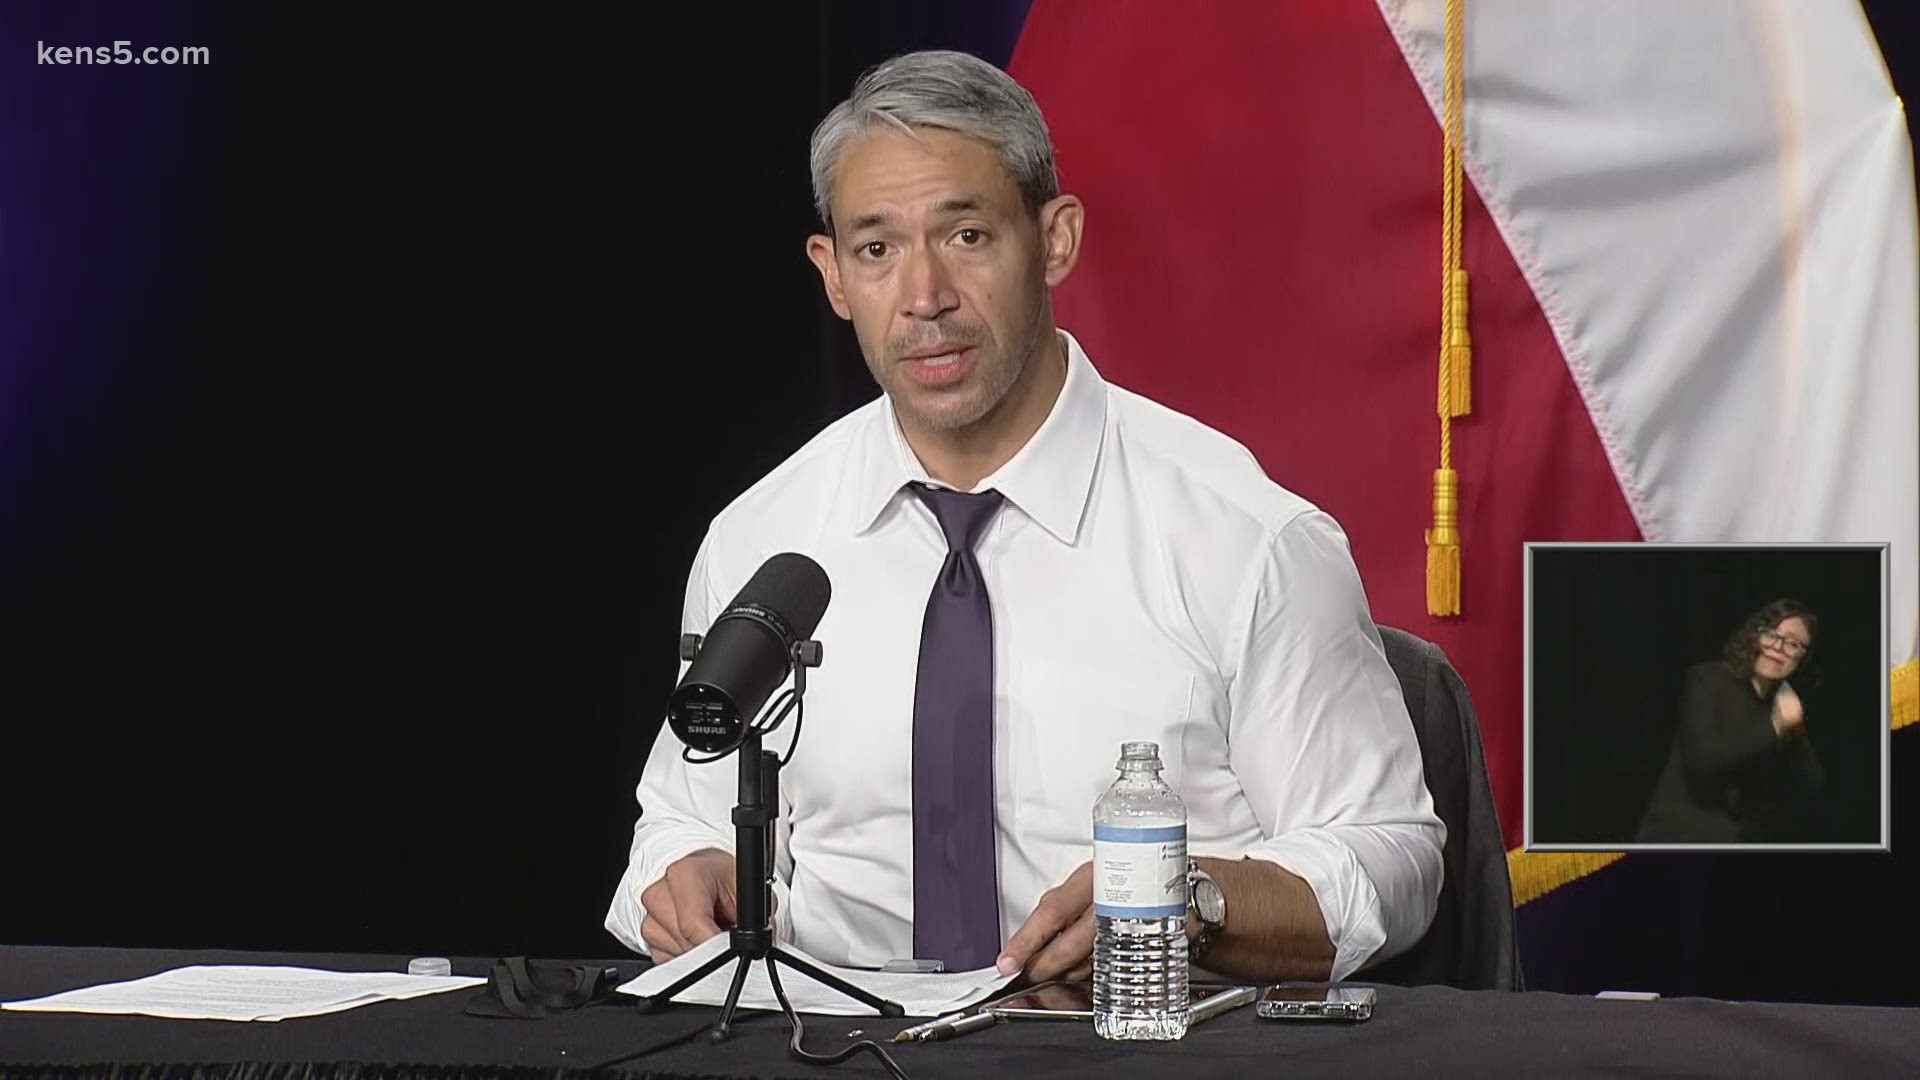 Mayor Nirenberg reported 151 new cases, bringing the total in Bexar County to 64,767. No new deaths were reported, so the death toll stands at 1,247.